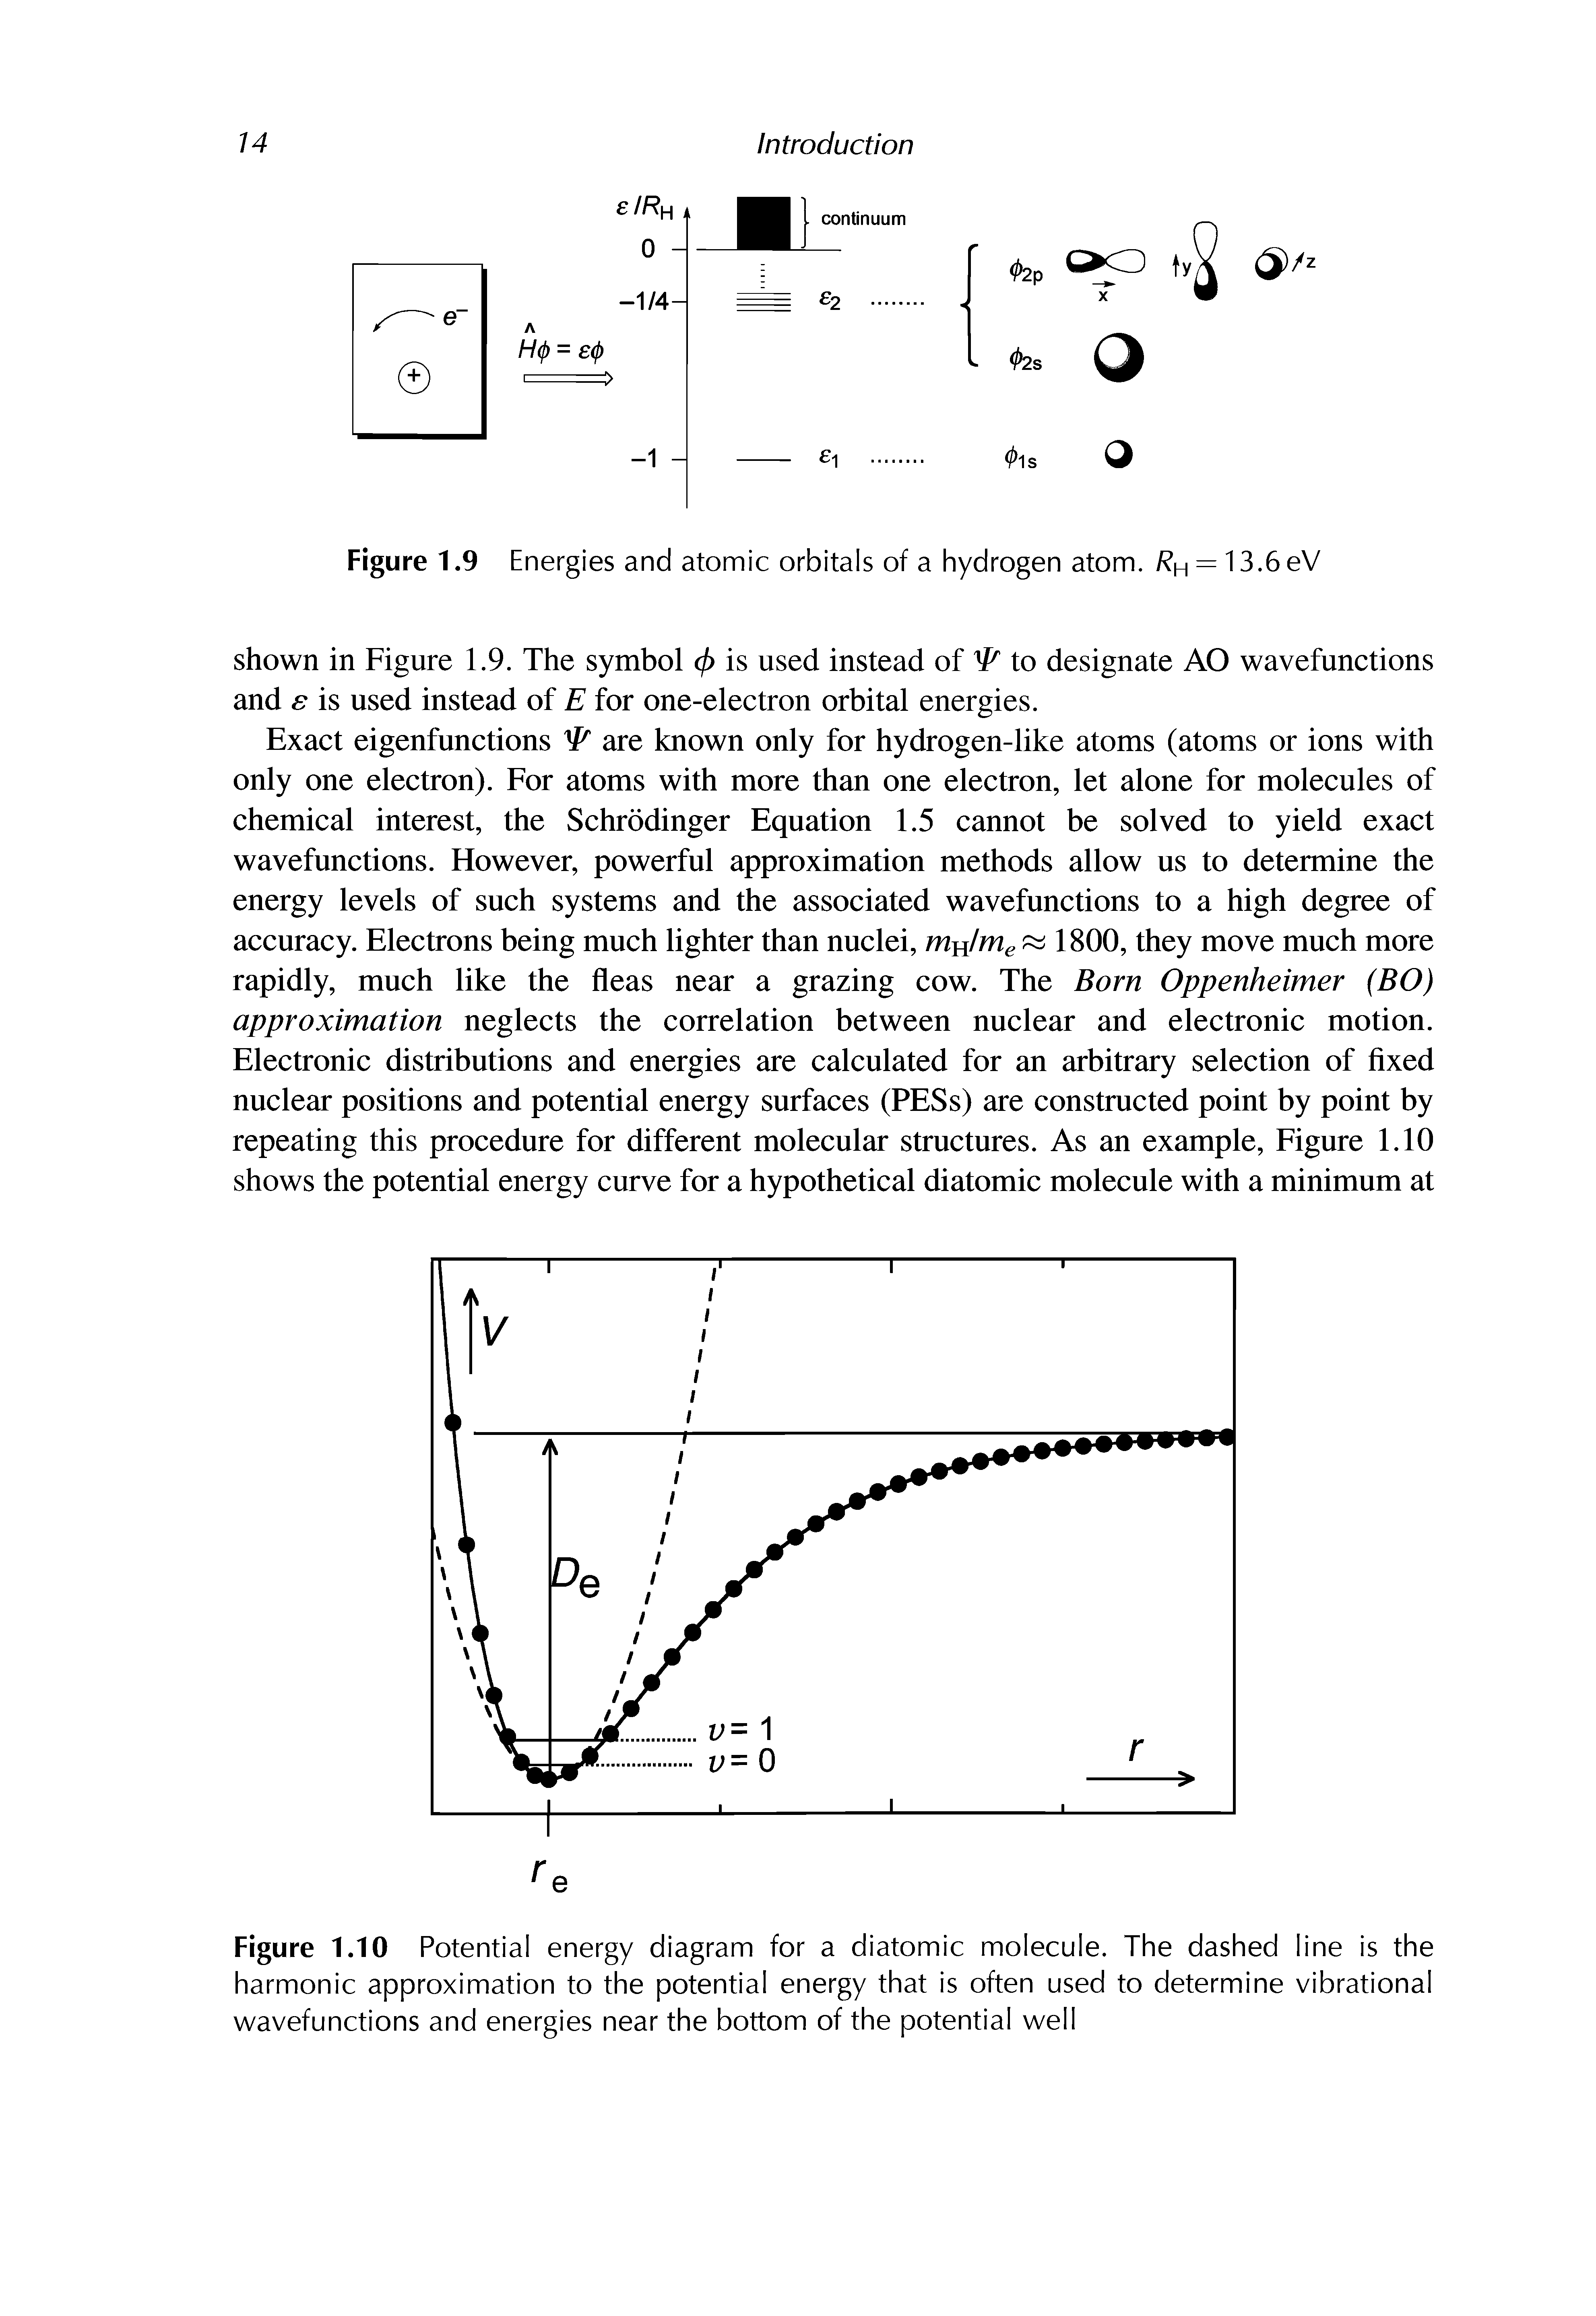 Figure 1.10 Potential energy diagram for a diatomic molecule. The dashed line is the harmonic approximation to the potential energy that is often used to determine vibrational wavefunctions and energies near the bottom of the potential well...